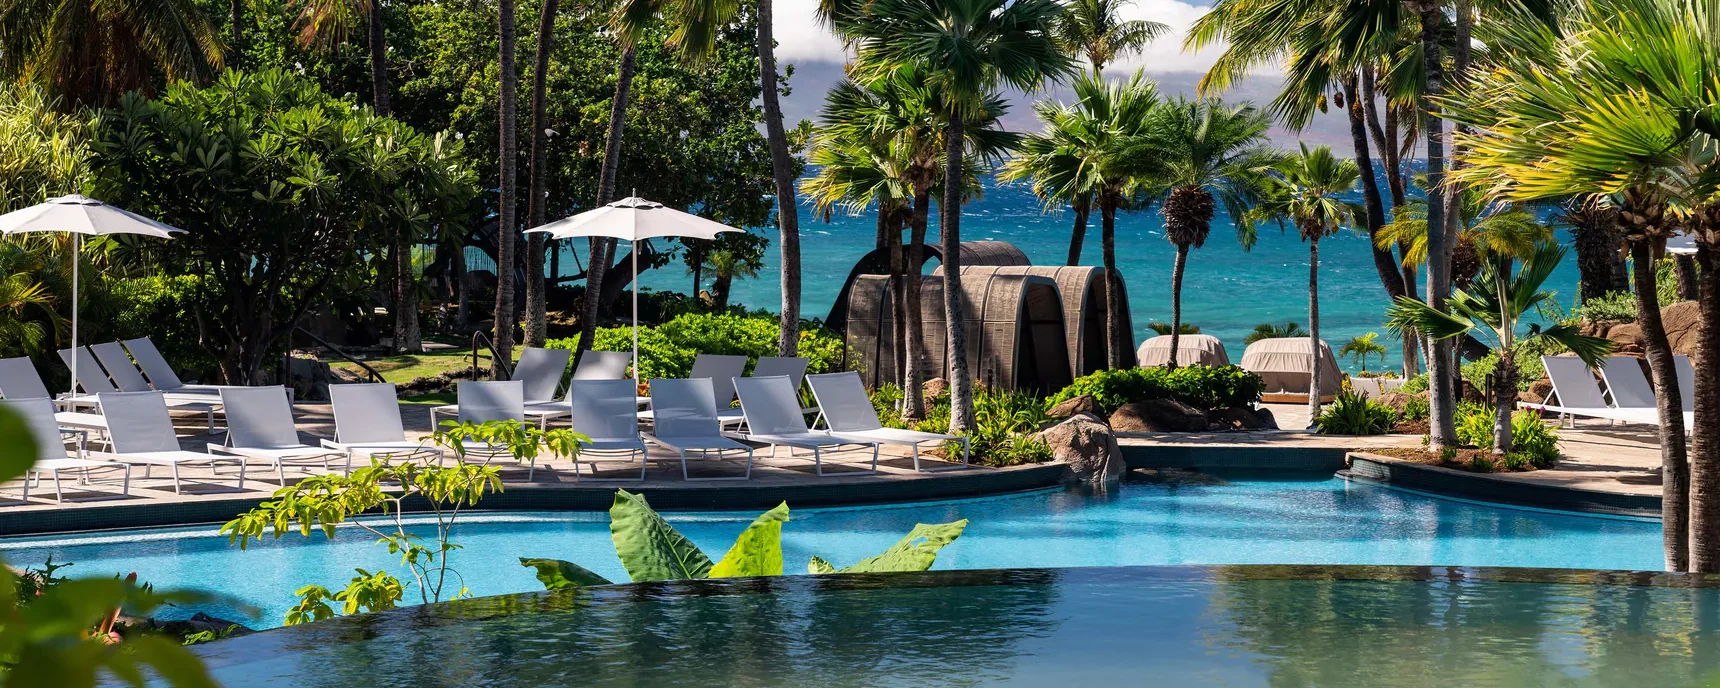 Source: https://www.marriott.com/en-us/hotels/hnmwi-the-westin-maui-resort-and-spa-kaanapali/experiences/